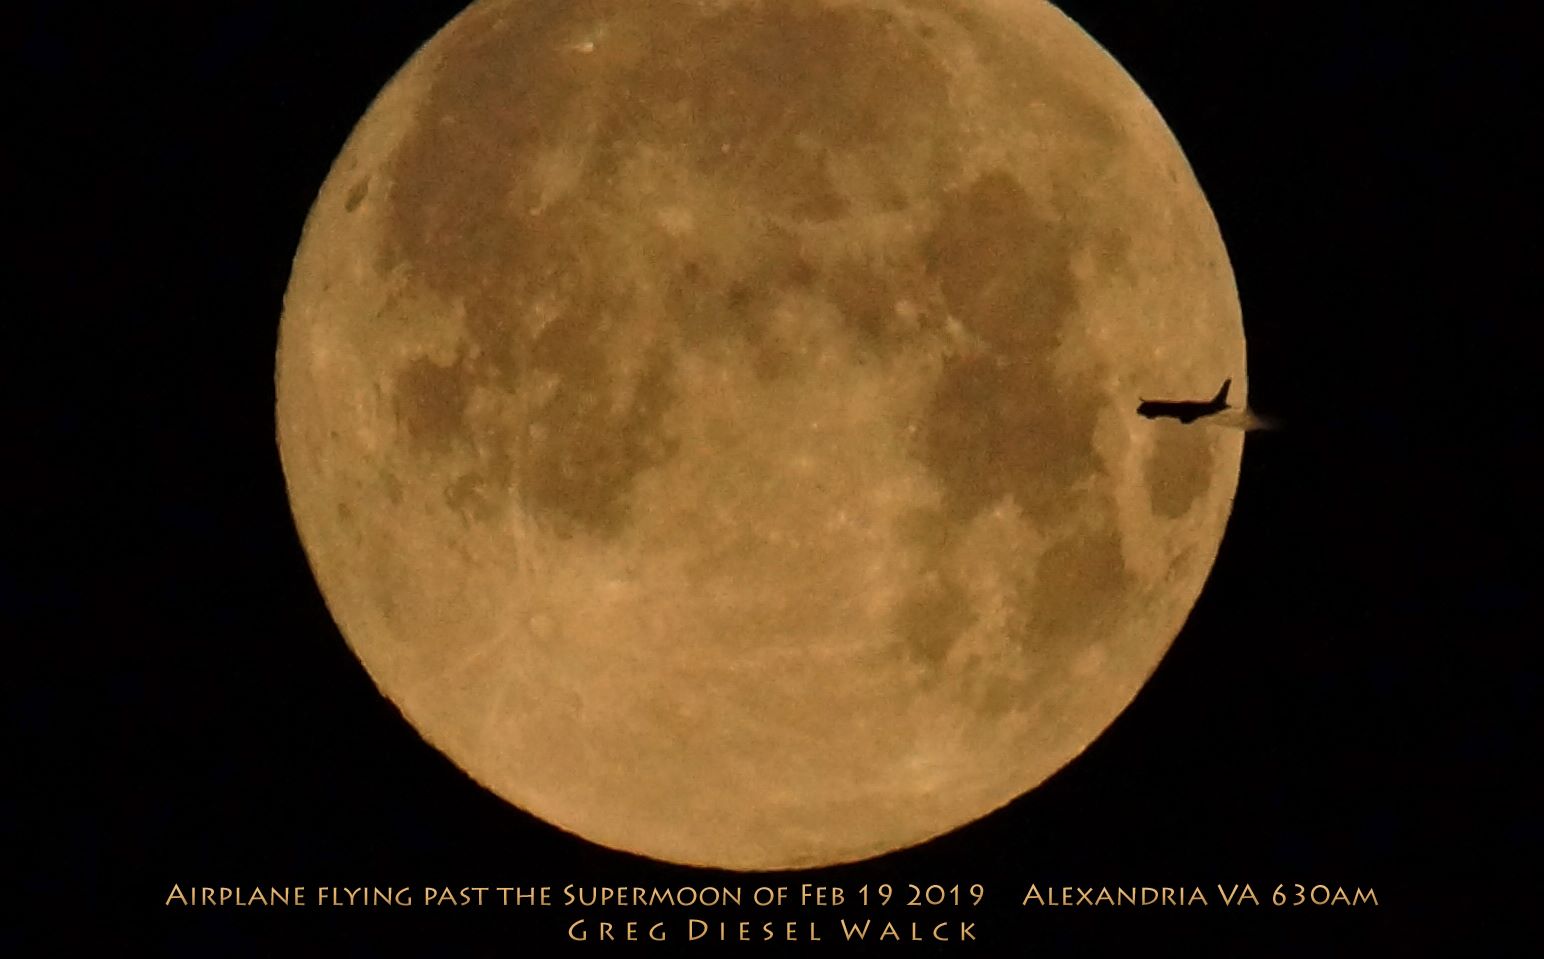 See it! Photos of 2019's biggest supermoon | Astronomy Essentials | EarthSky1544 x 959